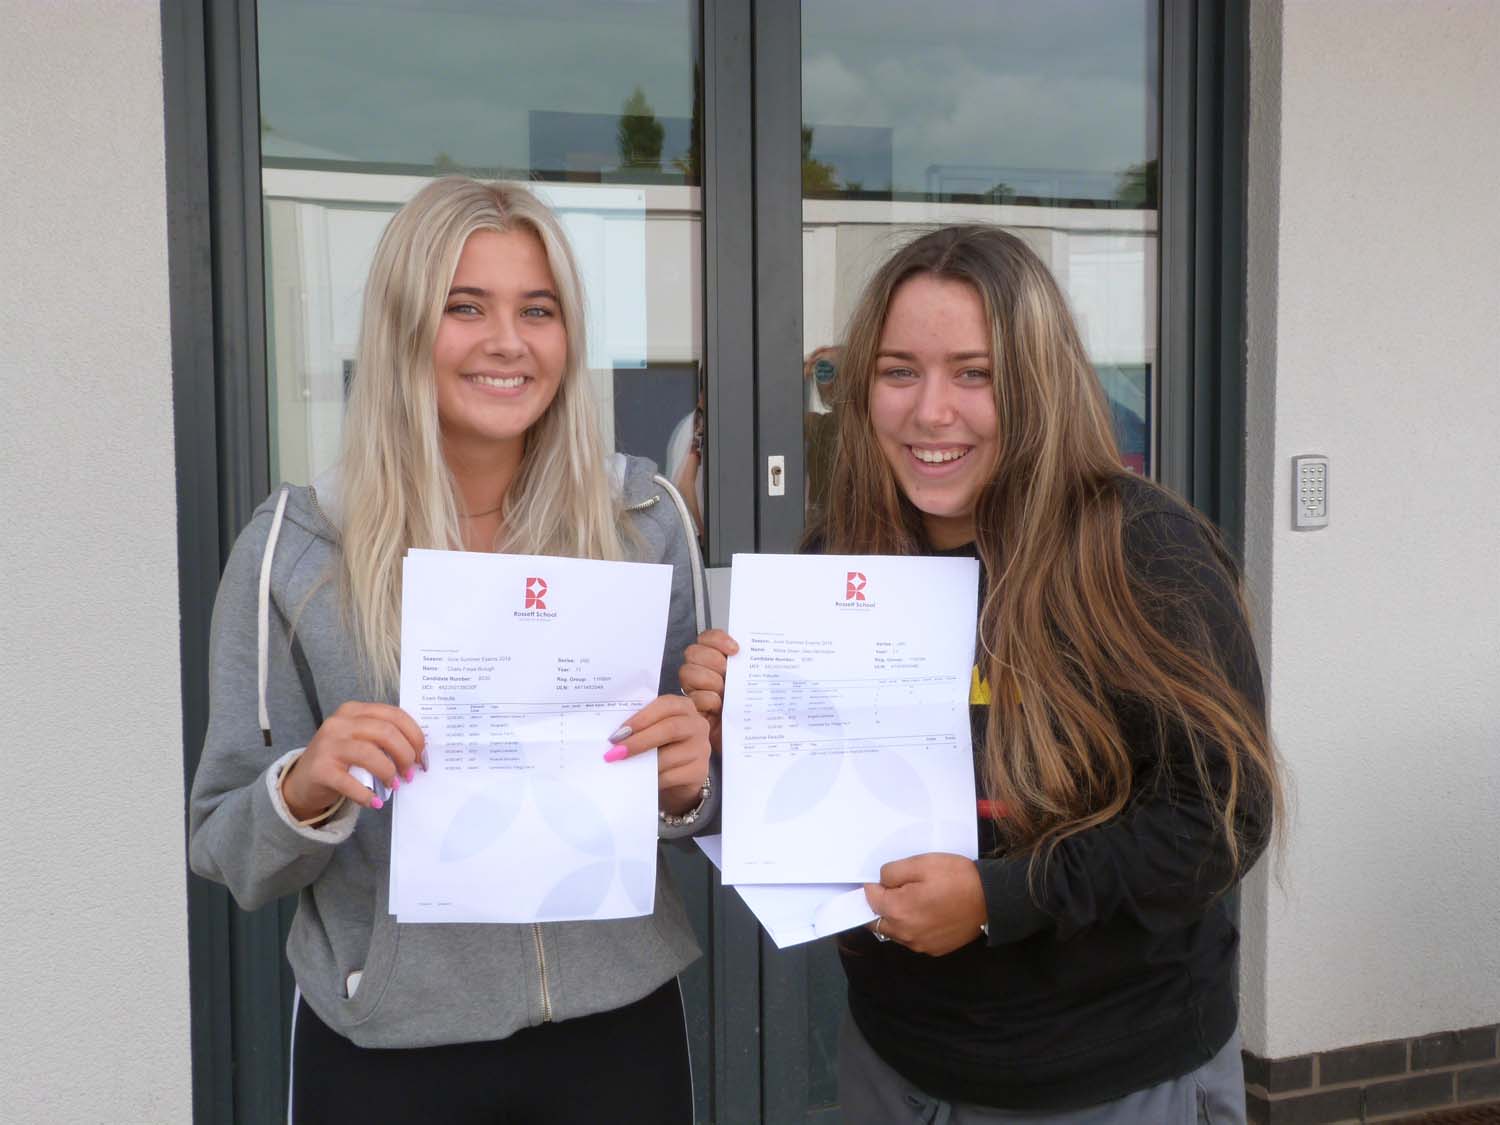 Chelo Brough and Nikita Nicholson were happy with their GCSE results and will be going on to further education